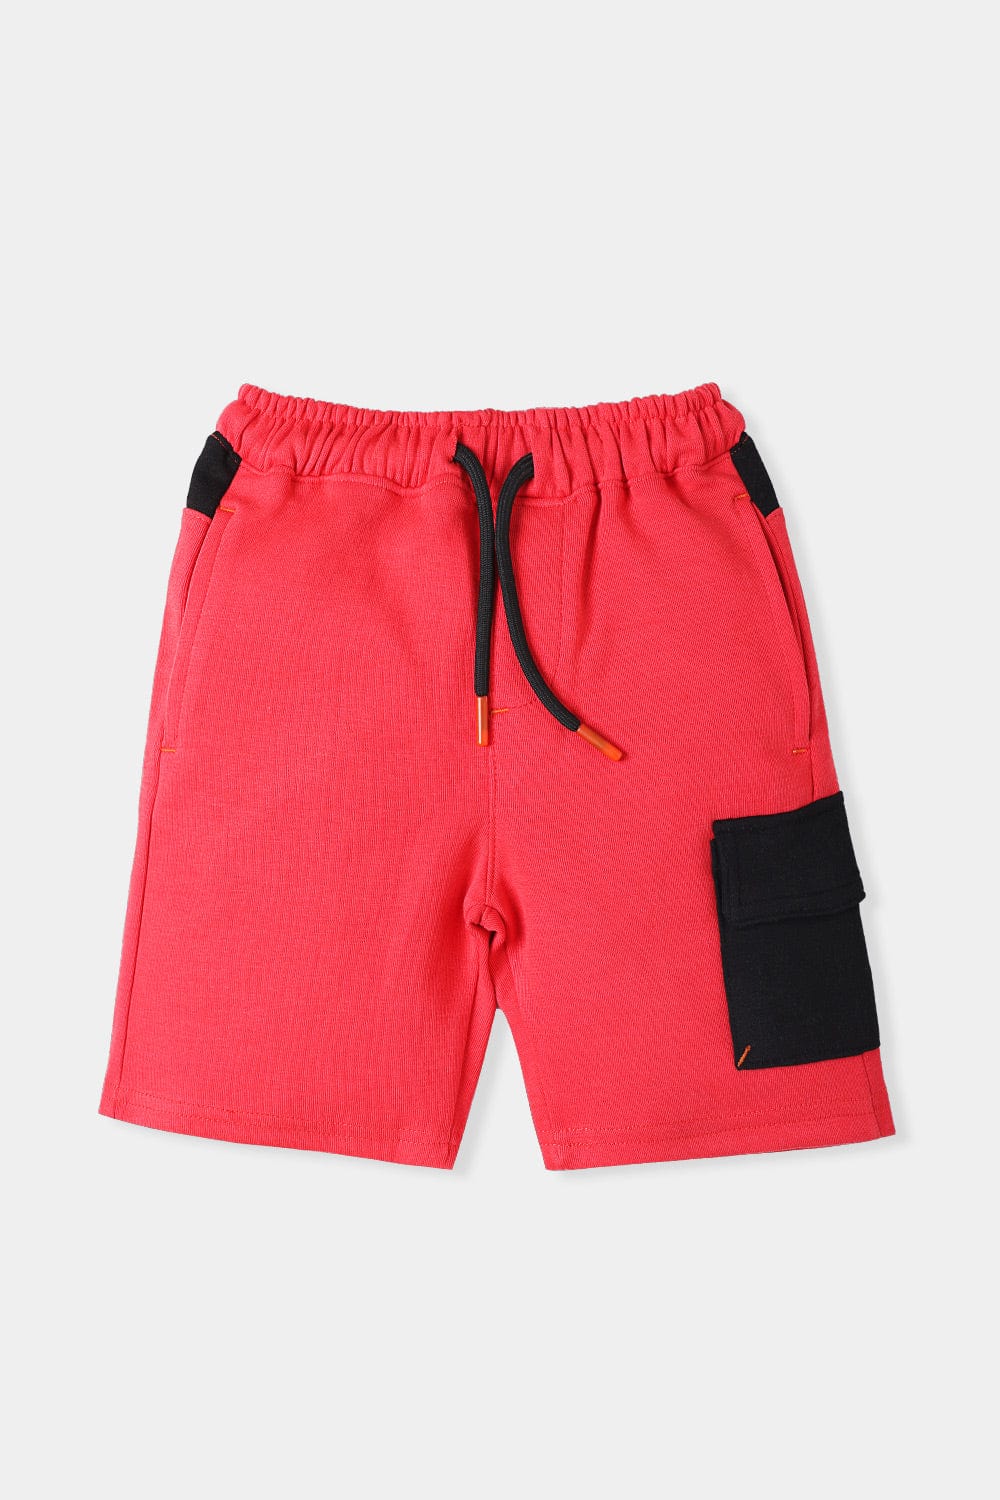 Hope Not Out by Shahid Afridi Boys Non Denim Shorts Red Knit Shorts with Contrast Black Pocket for Boys